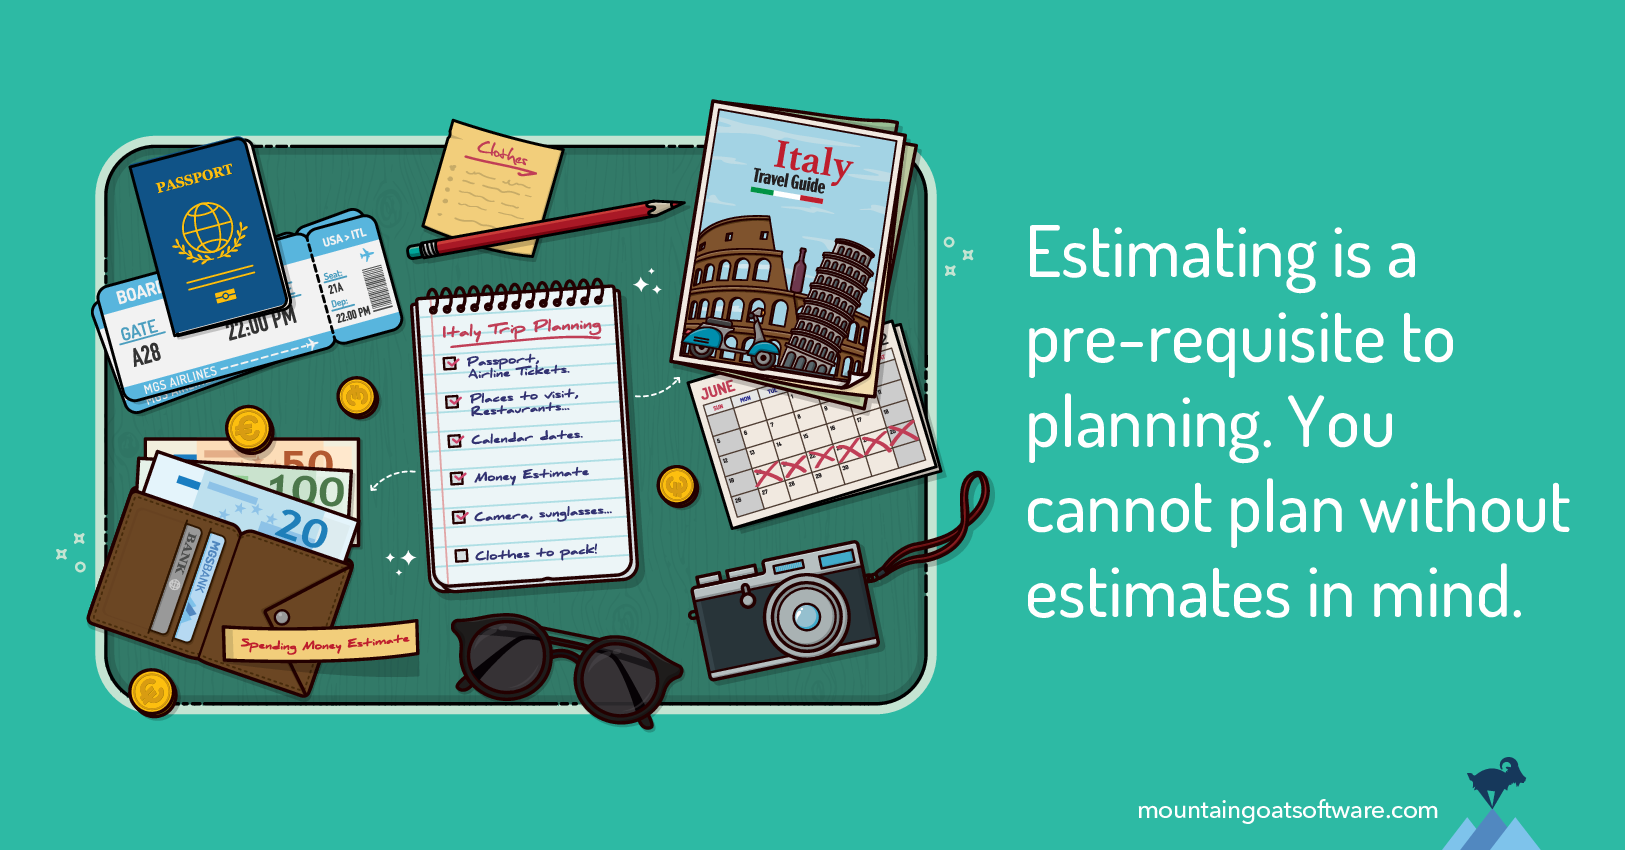 Estimating and Planning Are Necessary for Maximizing Delivered Value